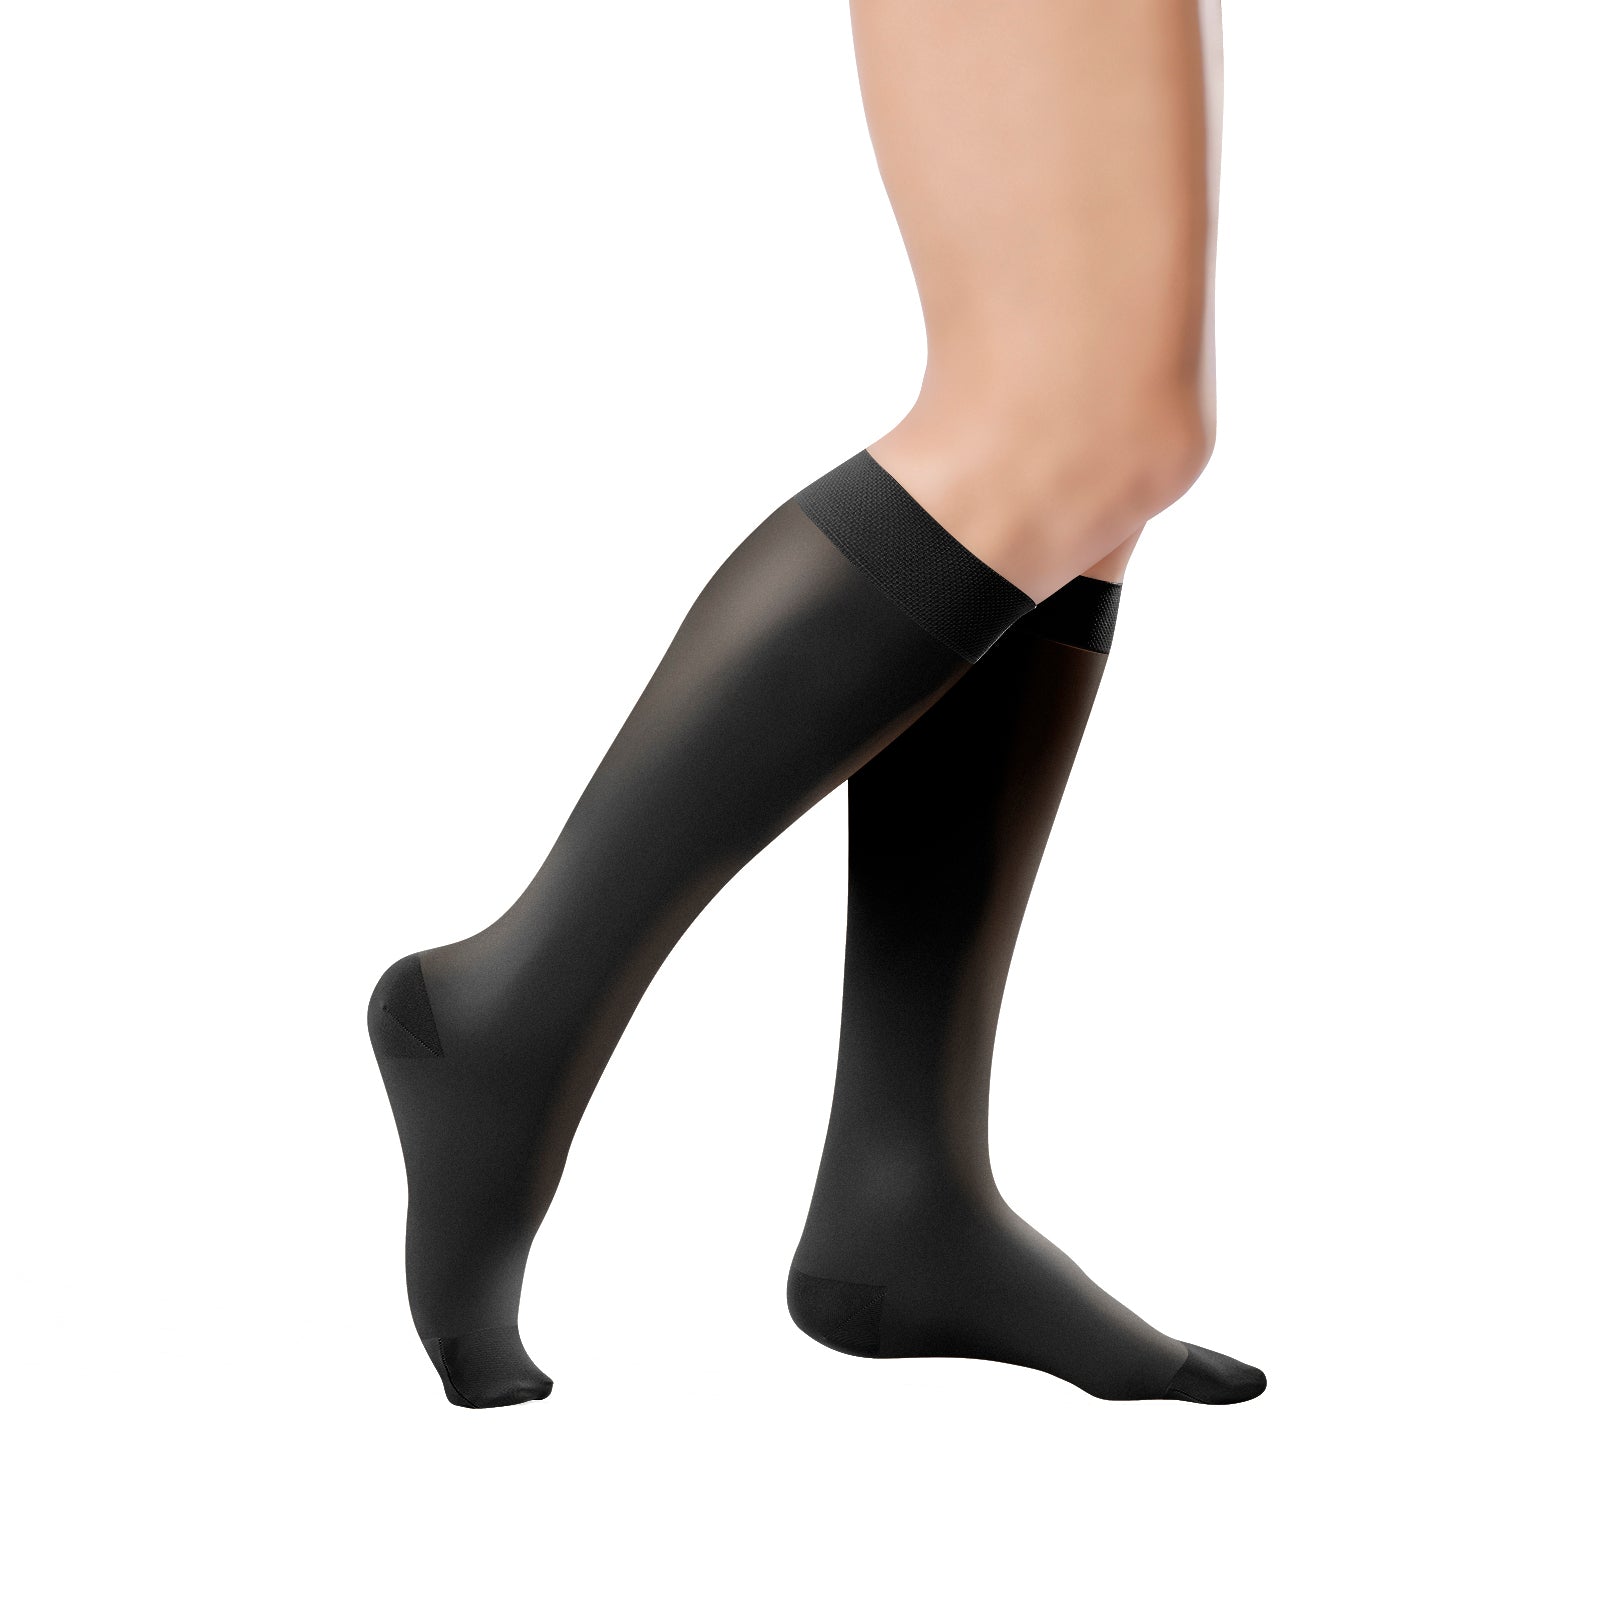 Thigh High Medical Compression Stockings 23-30mmHg for Varicose Veins  Unisex Footless Pressure Brace Wrap Shaping Socks Class 2